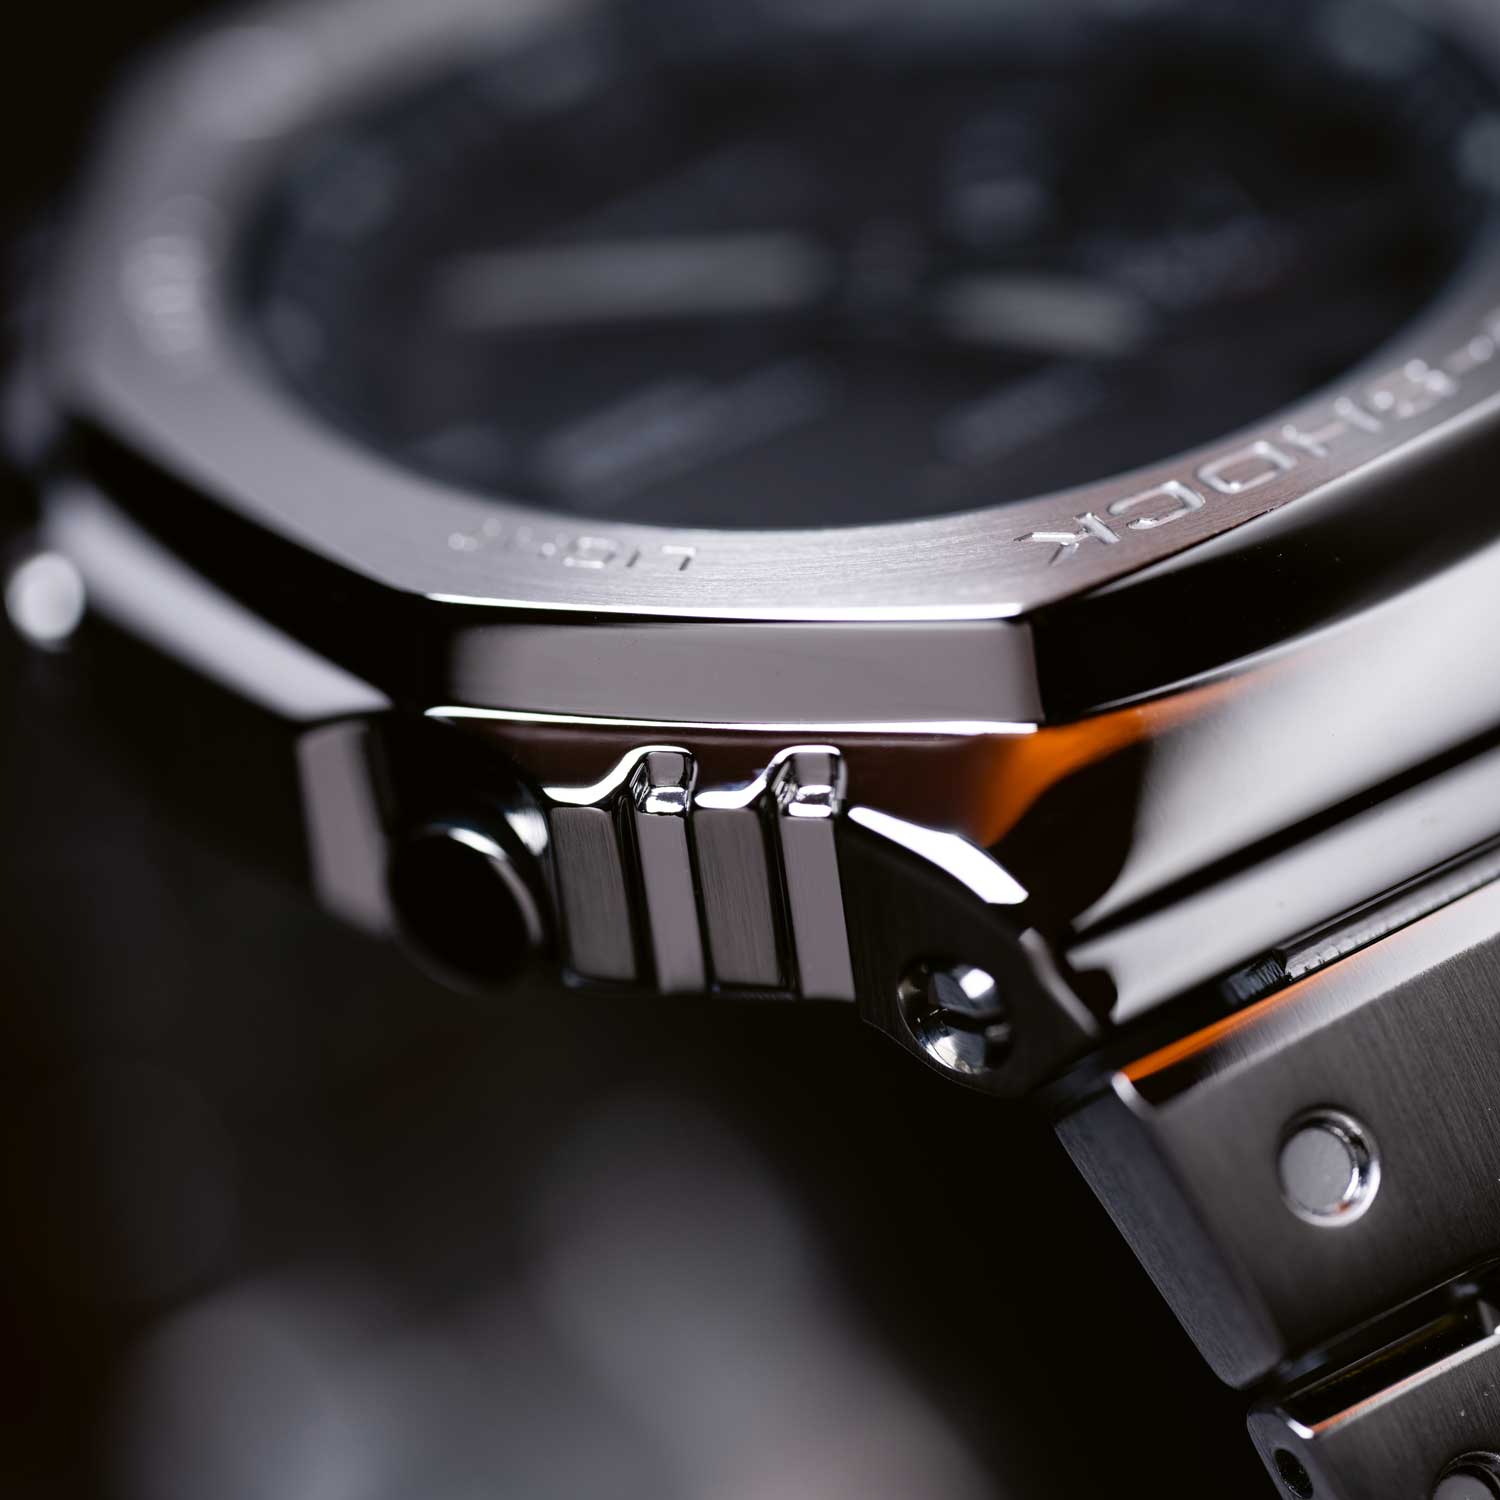 Finely brushed and polished surfaces define the stainless steel case (Image: Peter Tung)